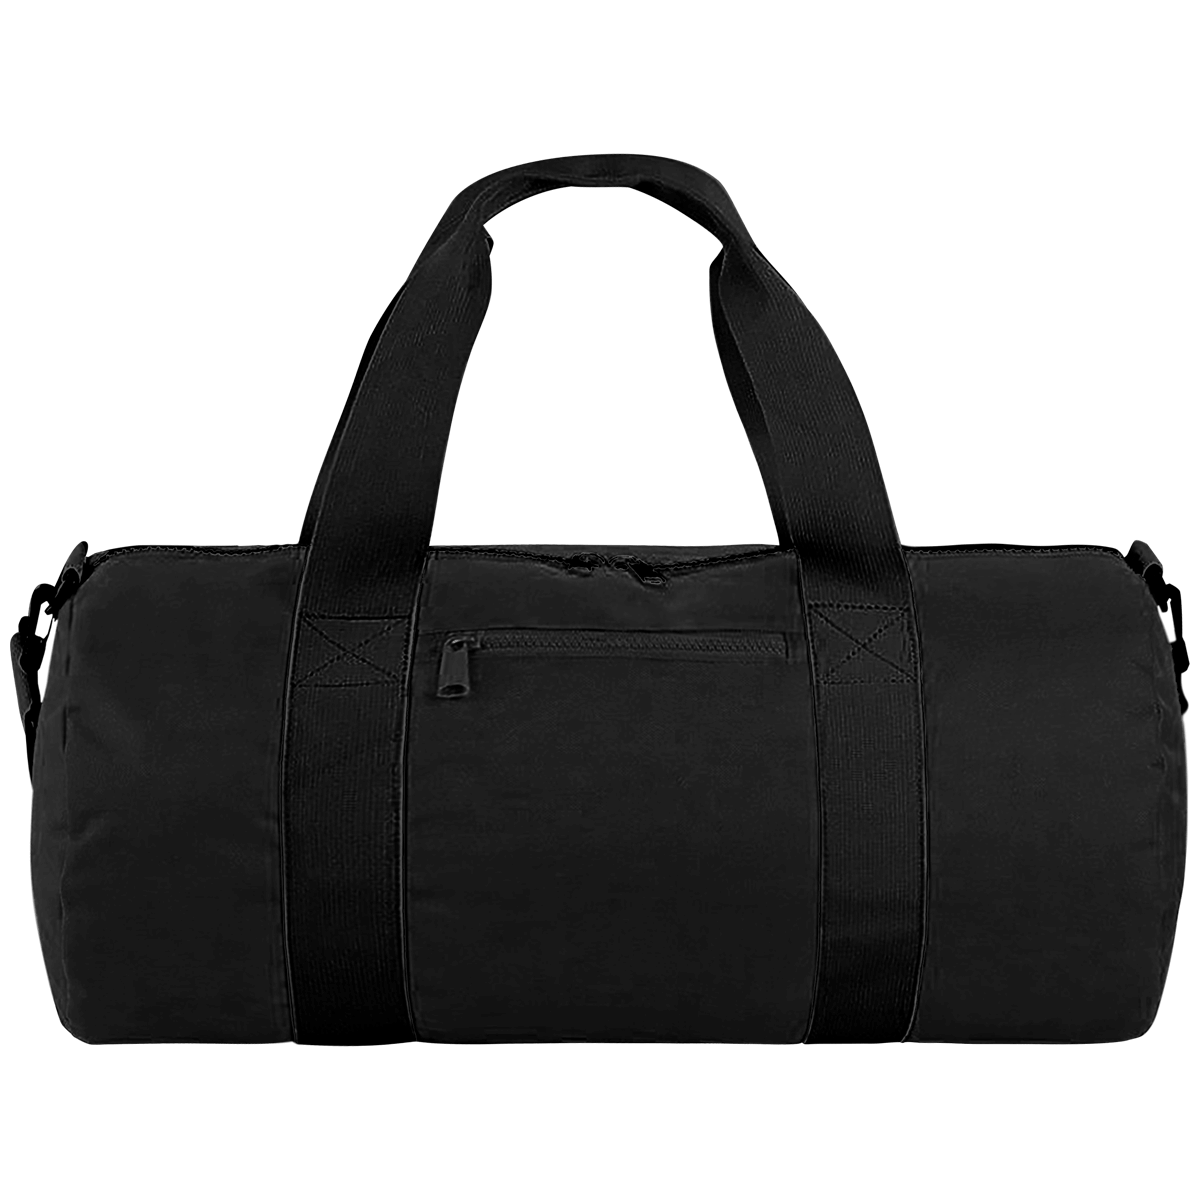 The Customizable Document Holder: A Reporter Bag For Your Business Meetings. Black / Black